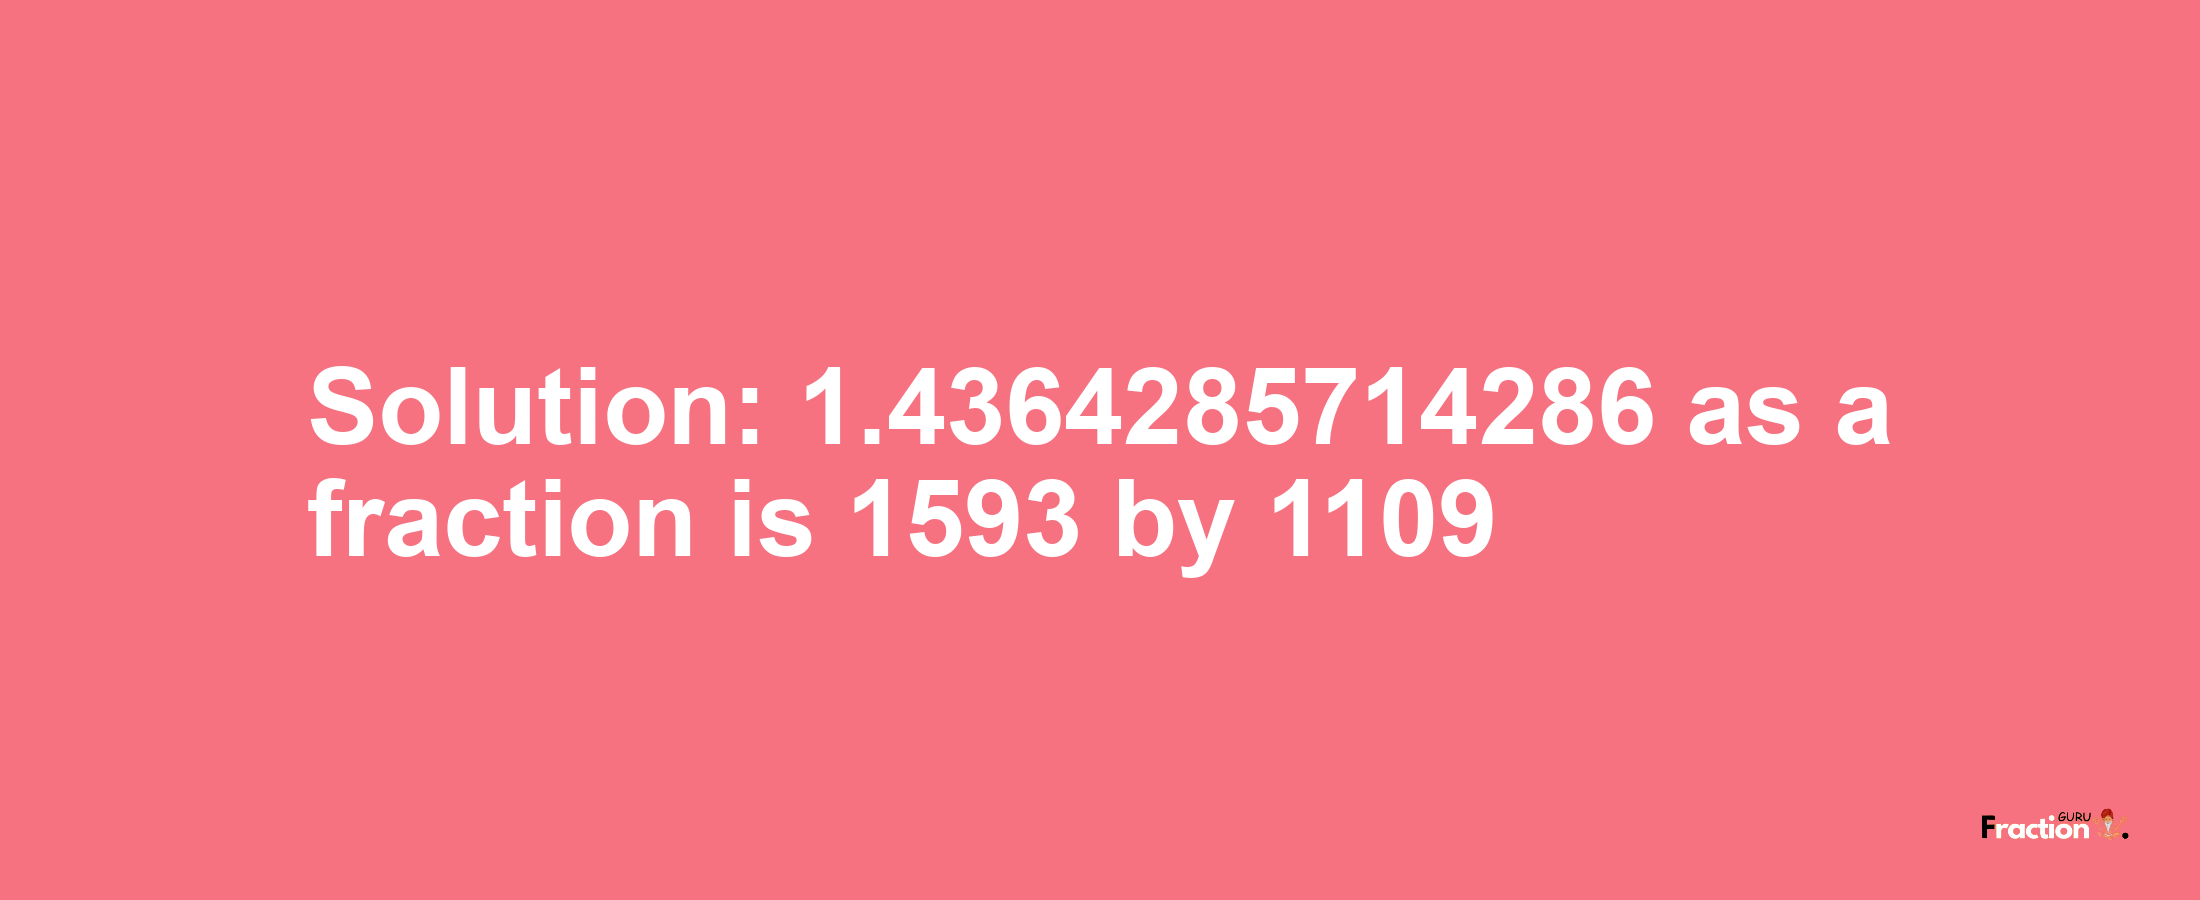 Solution:1.4364285714286 as a fraction is 1593/1109